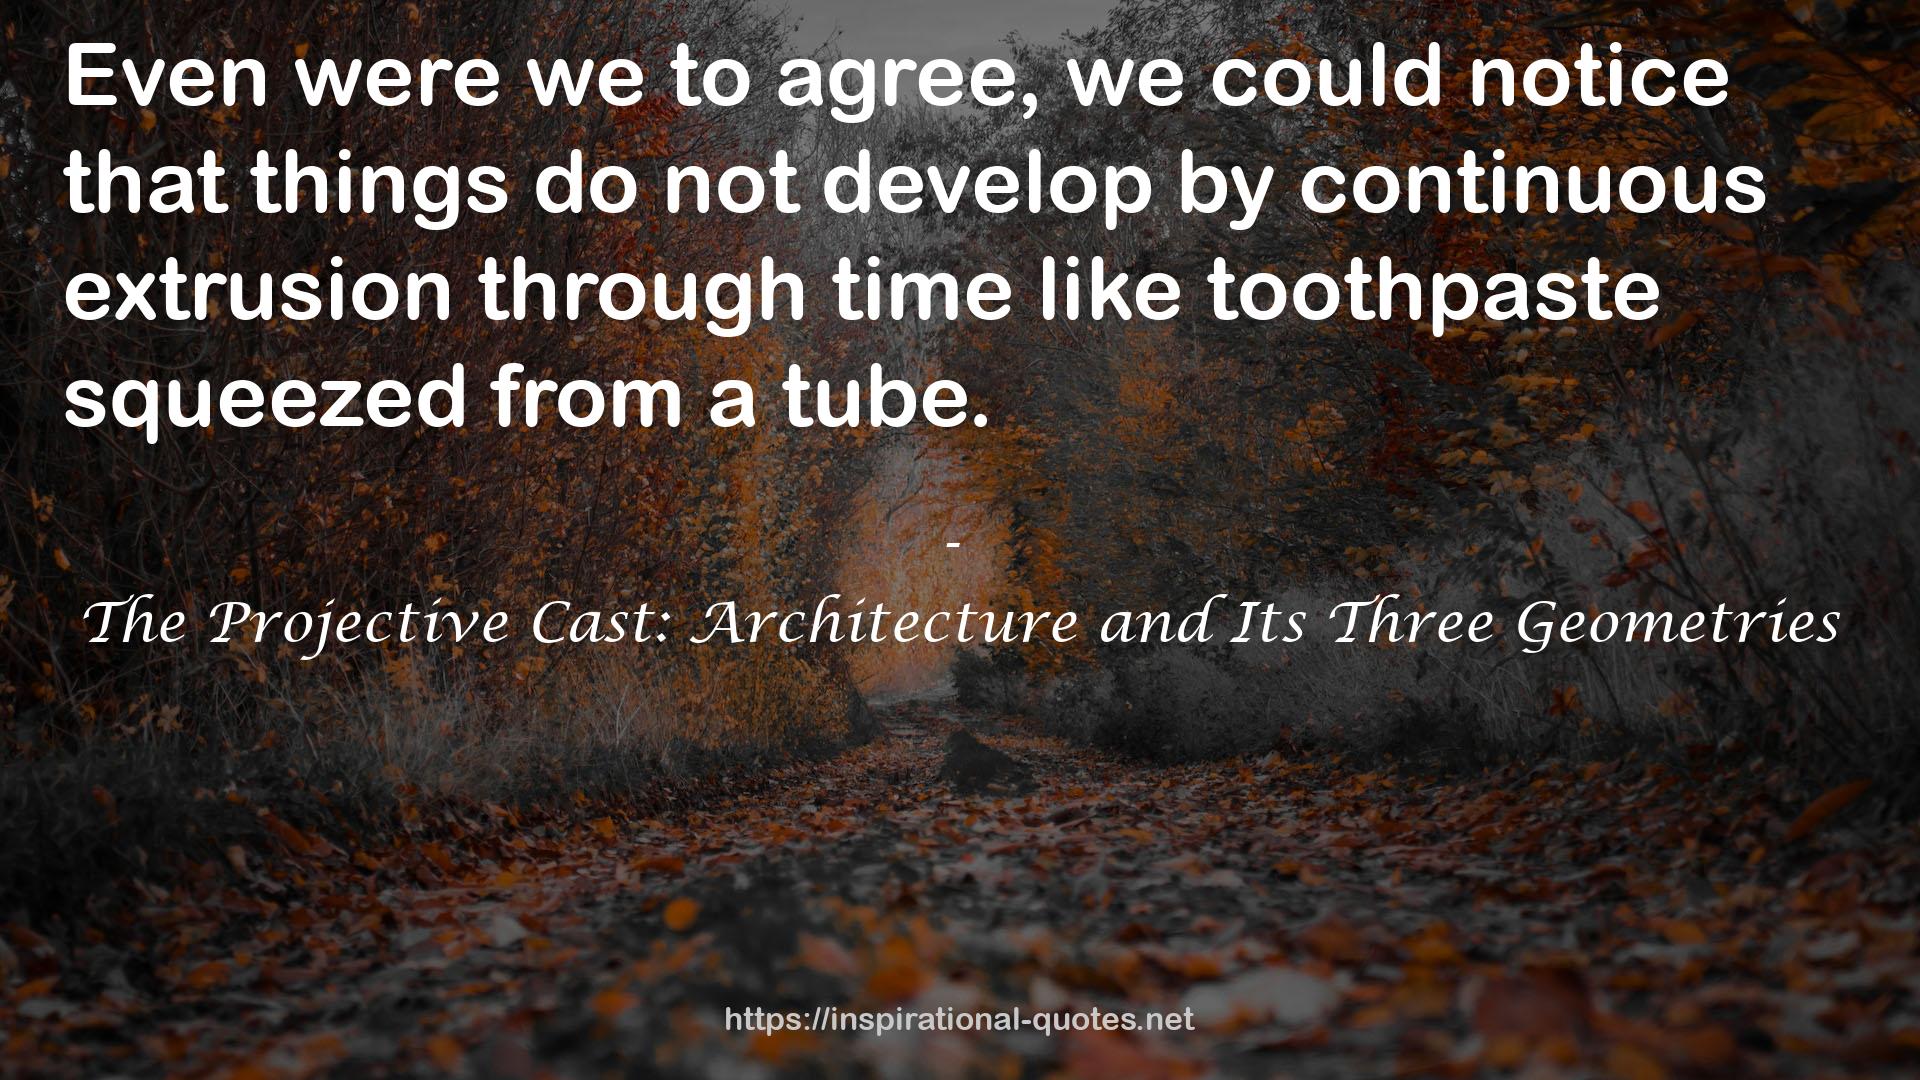 The Projective Cast: Architecture and Its Three Geometries QUOTES